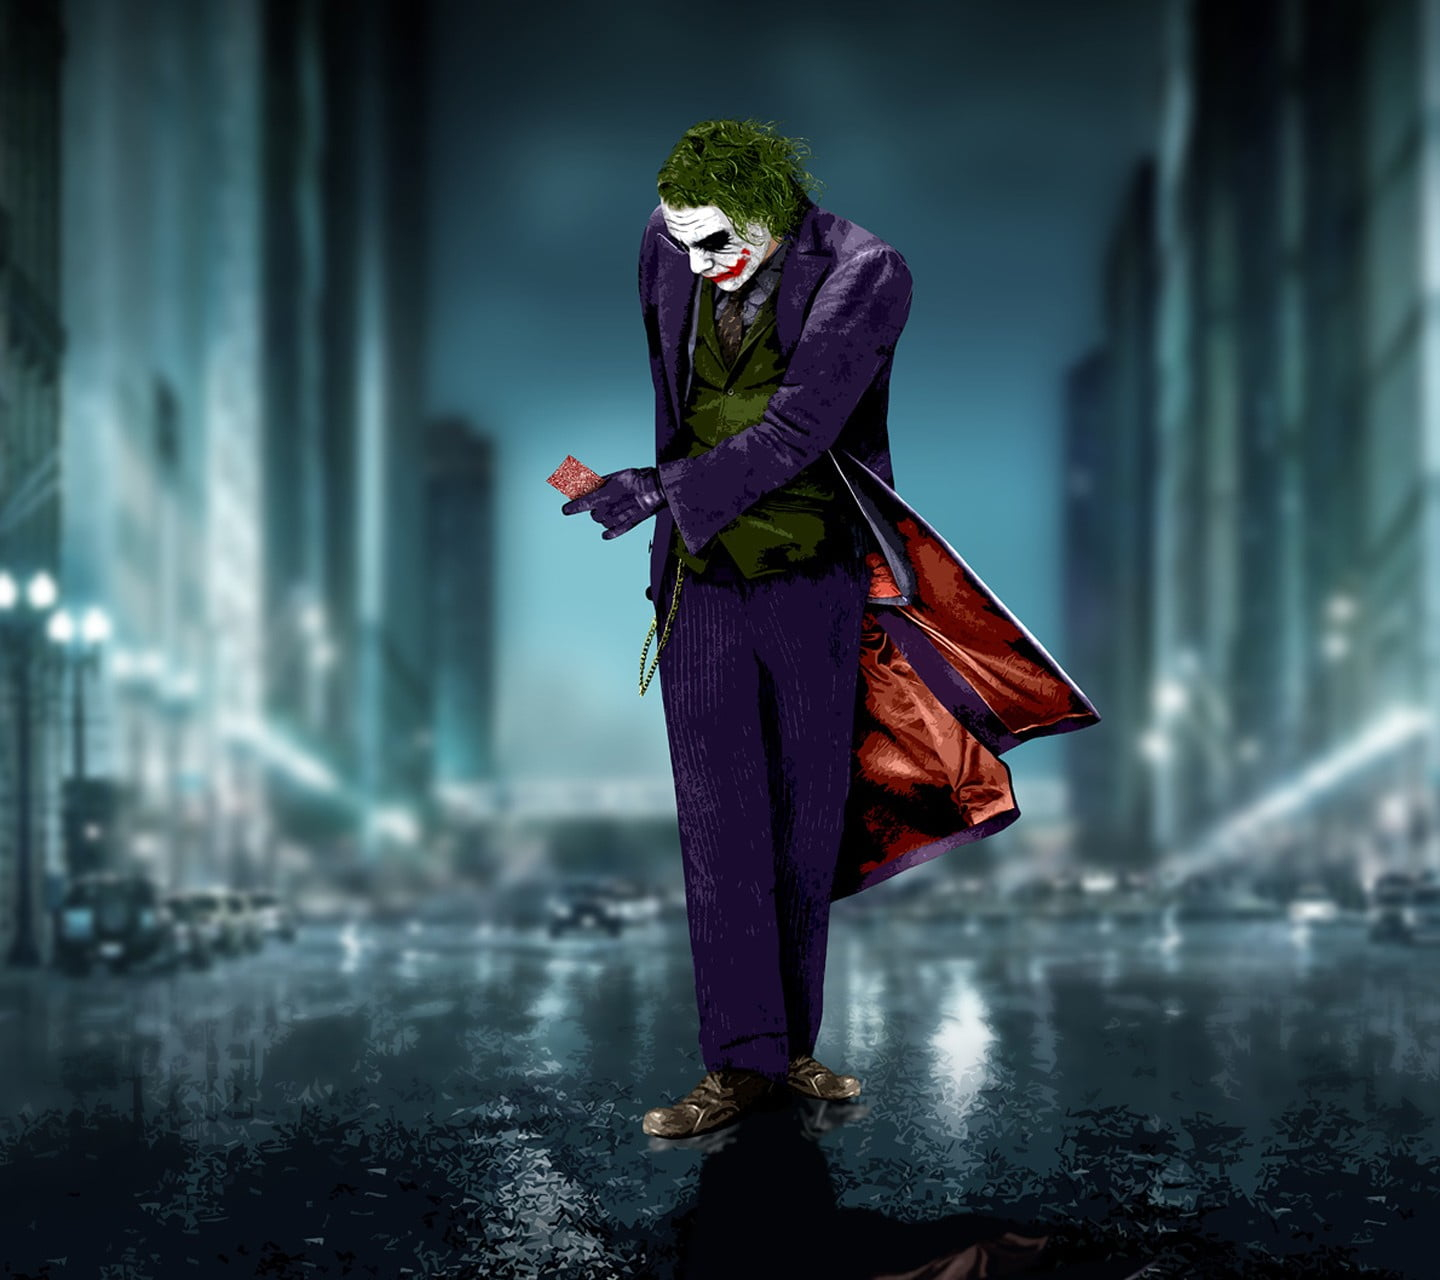 The Joker wallpaper The Dark Knight movies full length one person